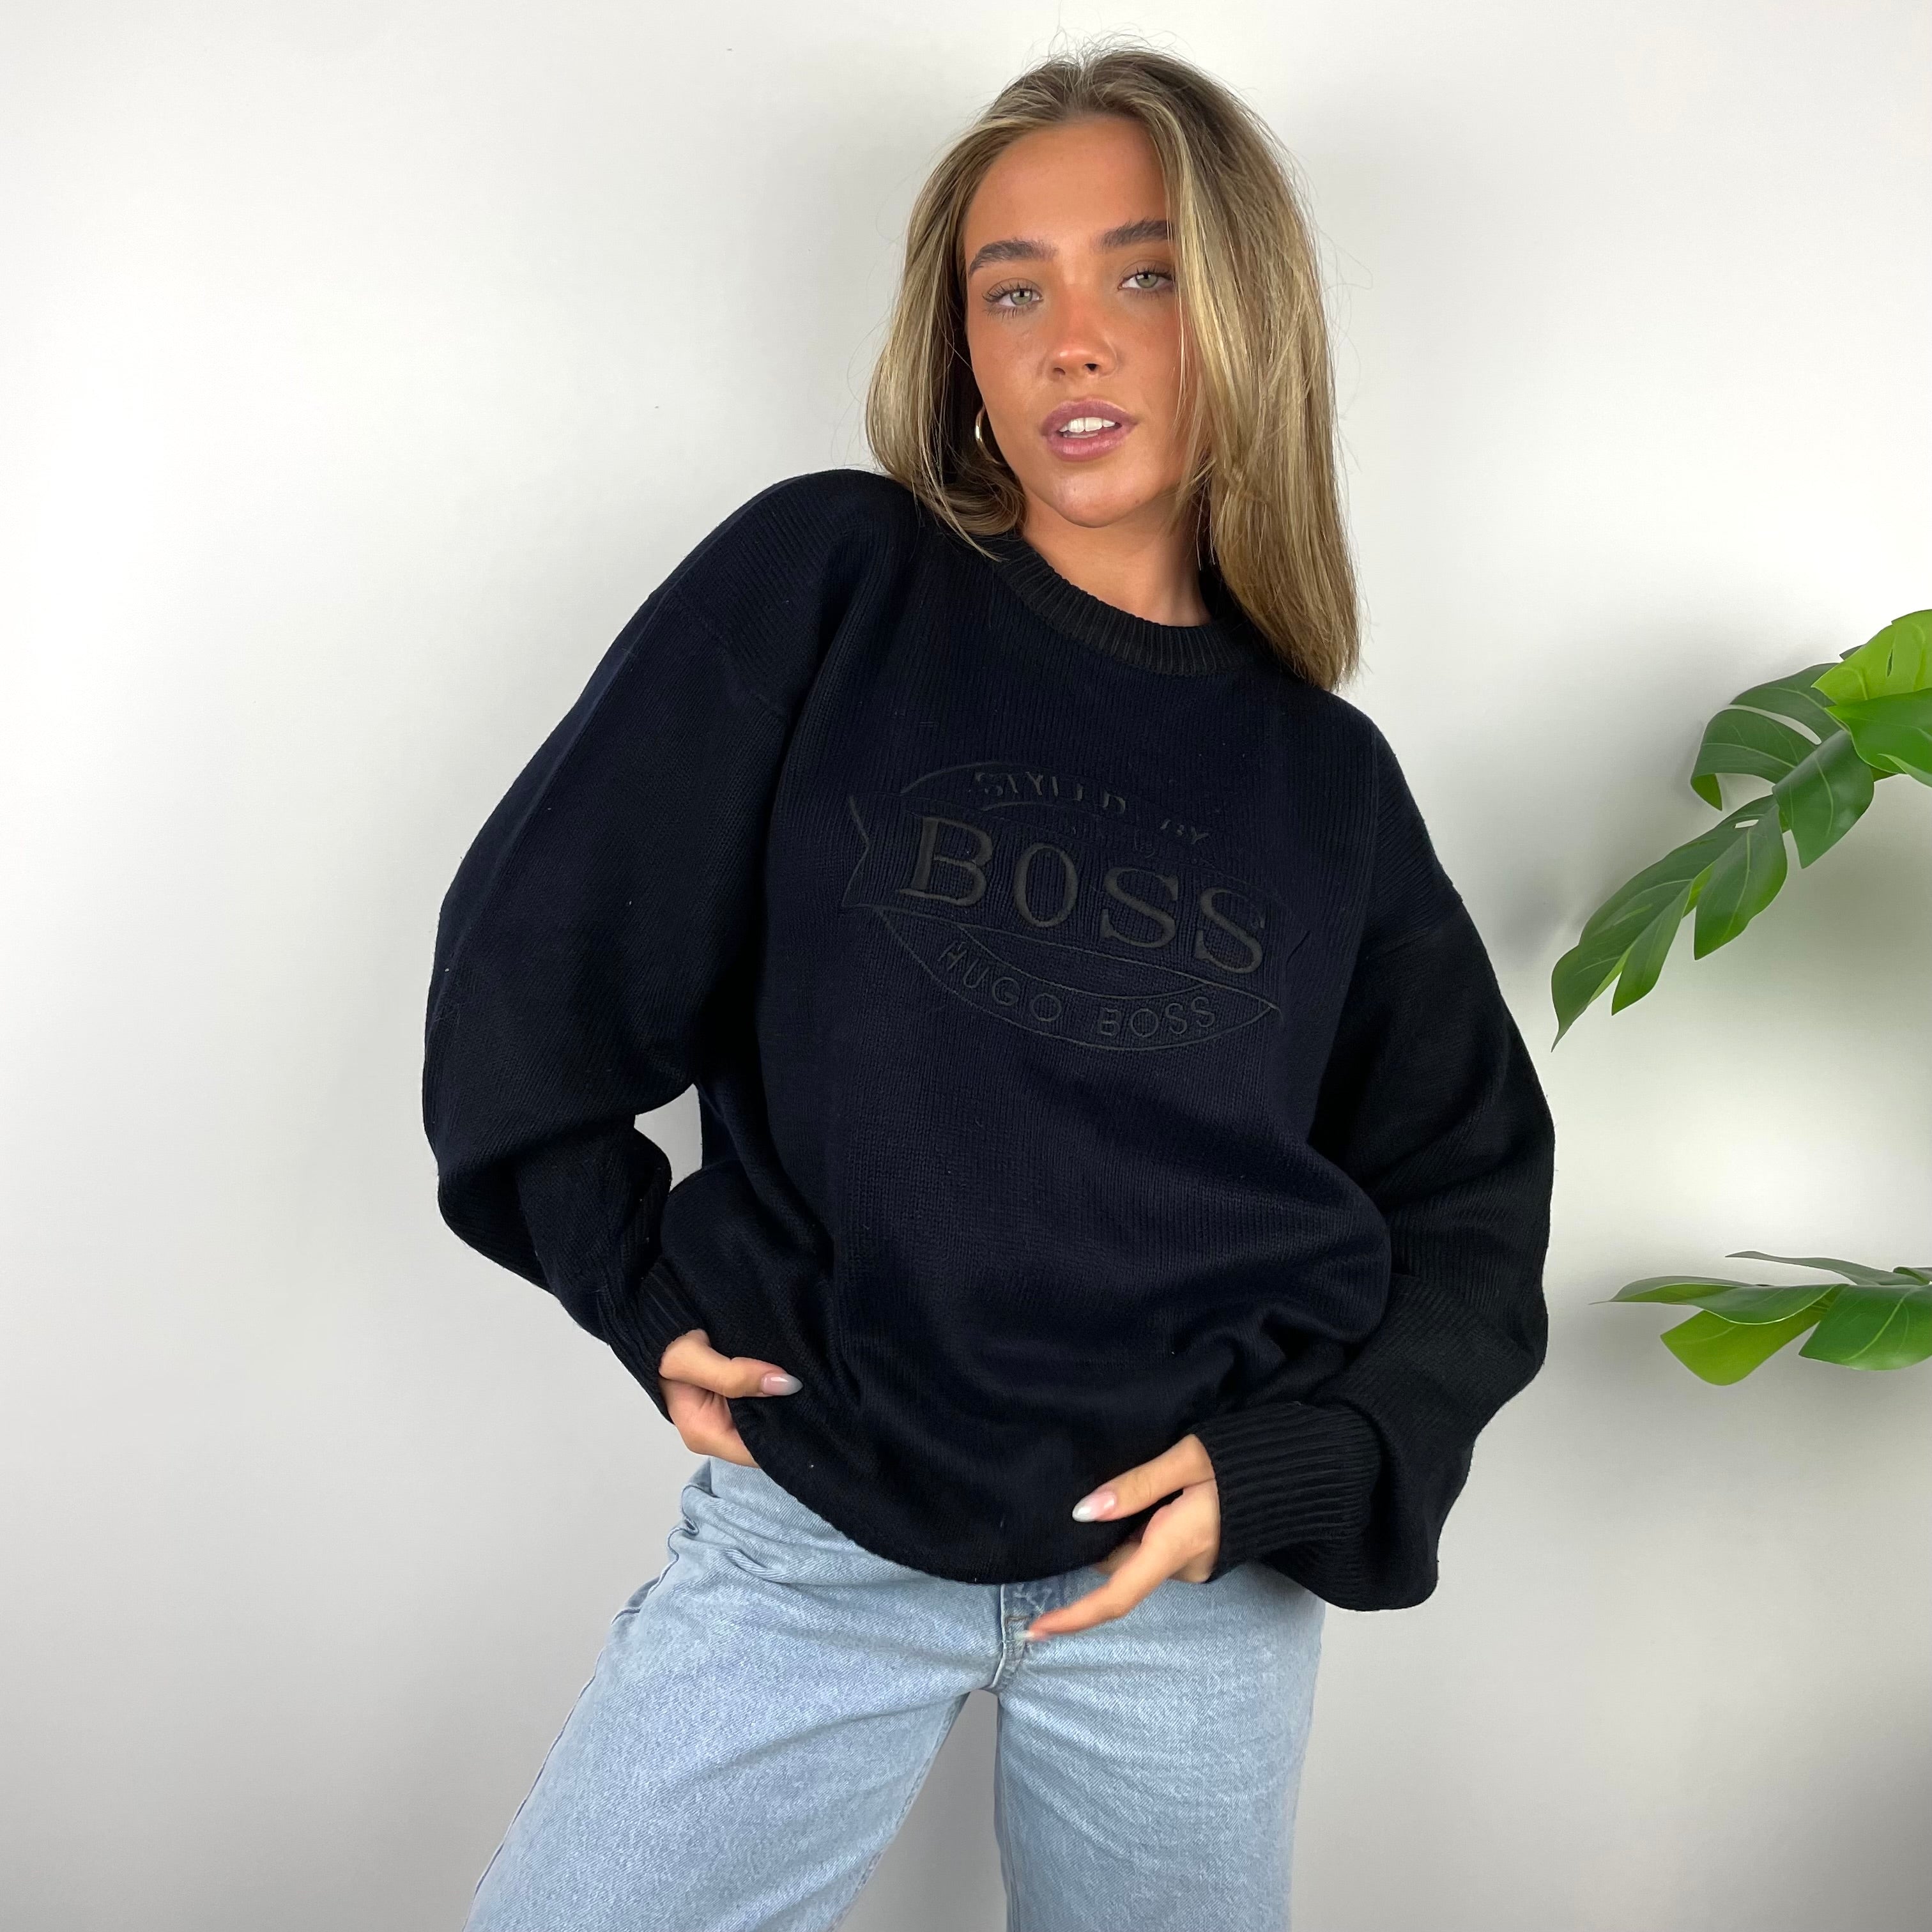 Hugo Boss RARE Navy Embroidered Spell Out Knitted Sweater (M)